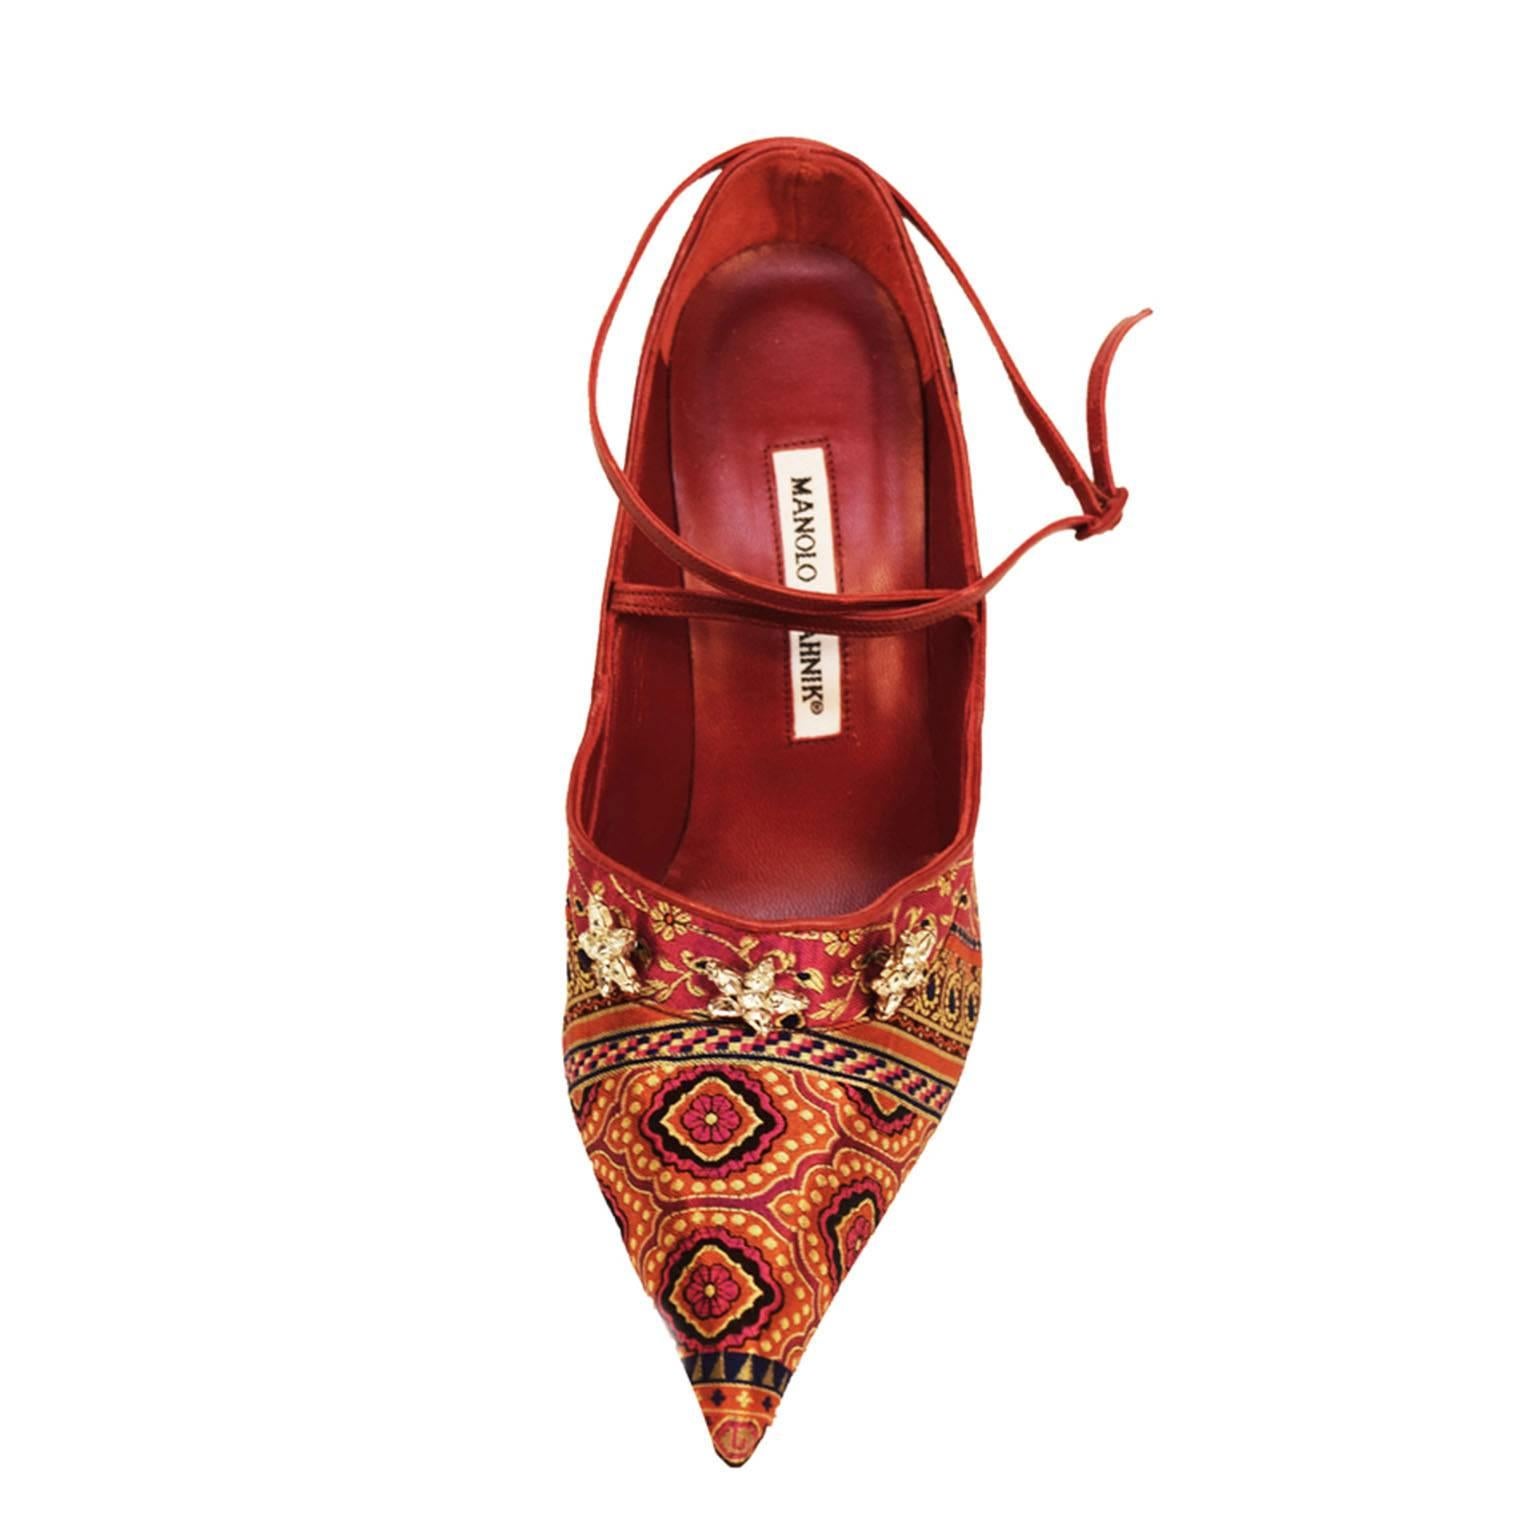 Manolo Blahnik brocade constructed upper with cross around ankle strap. Velvet red leather insole and interior, with cross ankle leather strap. Suede velvet red heel with black top piece and barely worn nude sole. Swarovski Rhinestone star